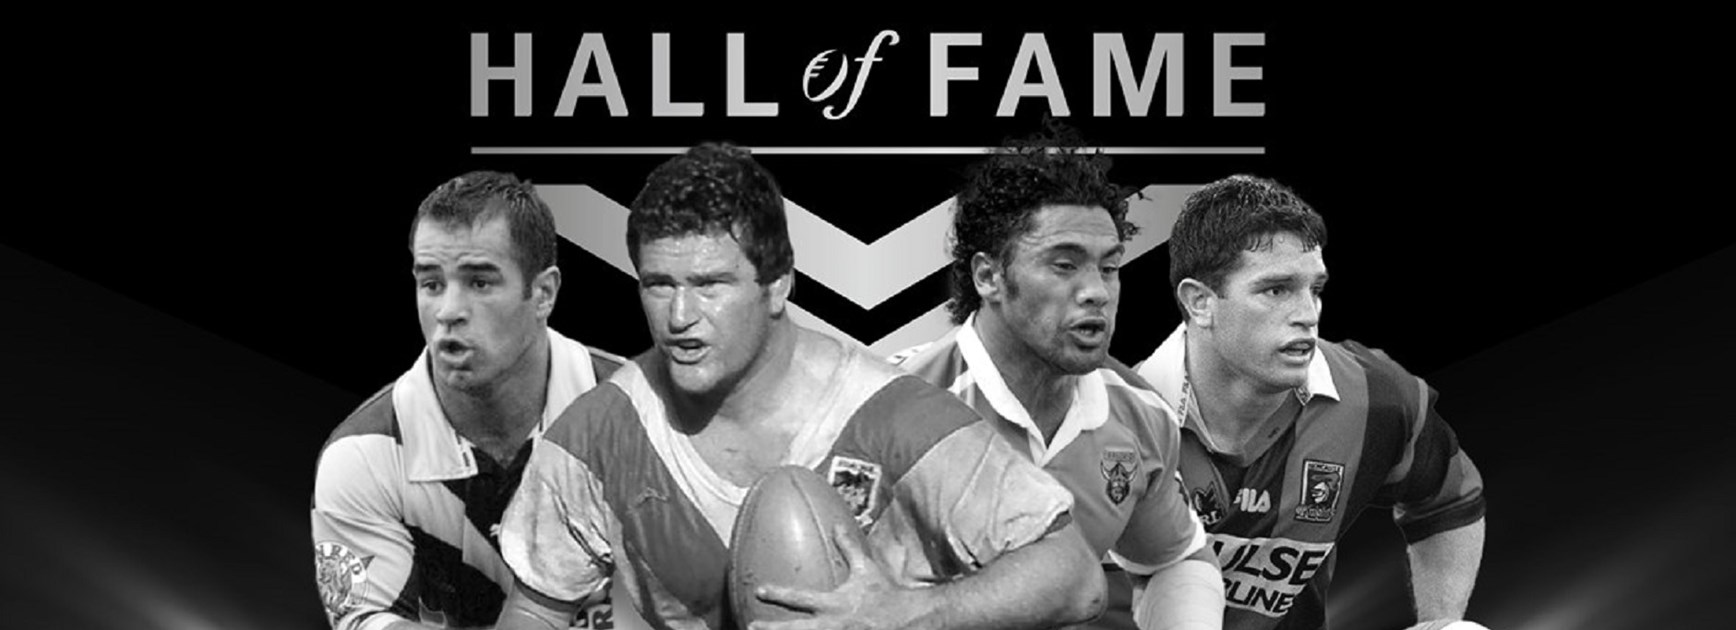 Wiki and Jones now Hall of Famers